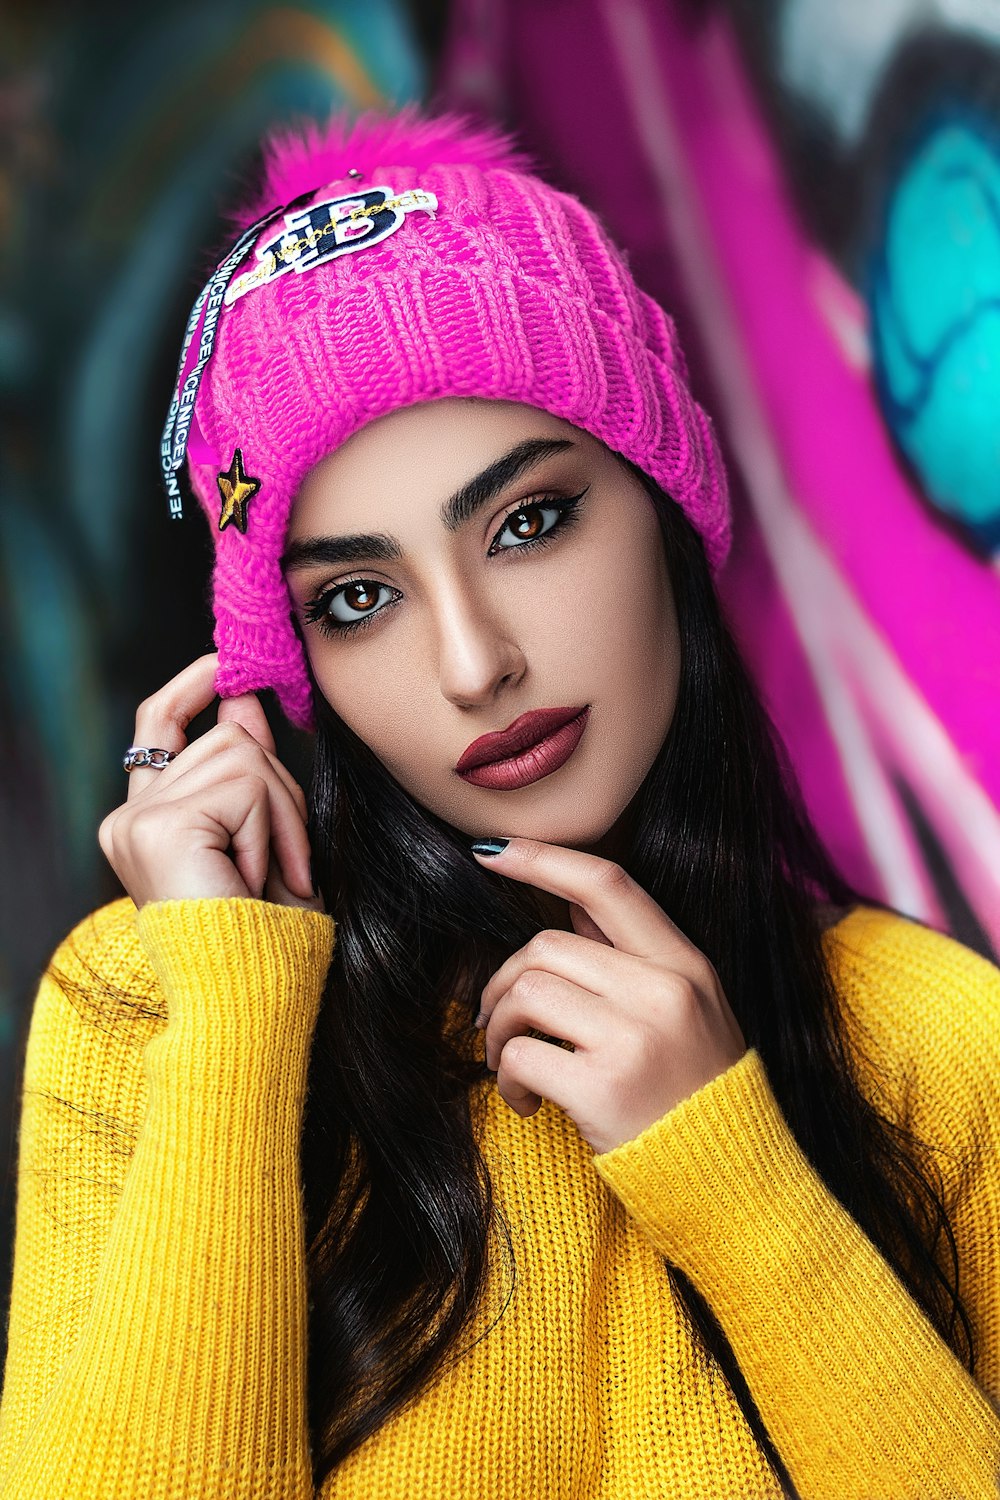 woman in yellow knit sweater and knit cap